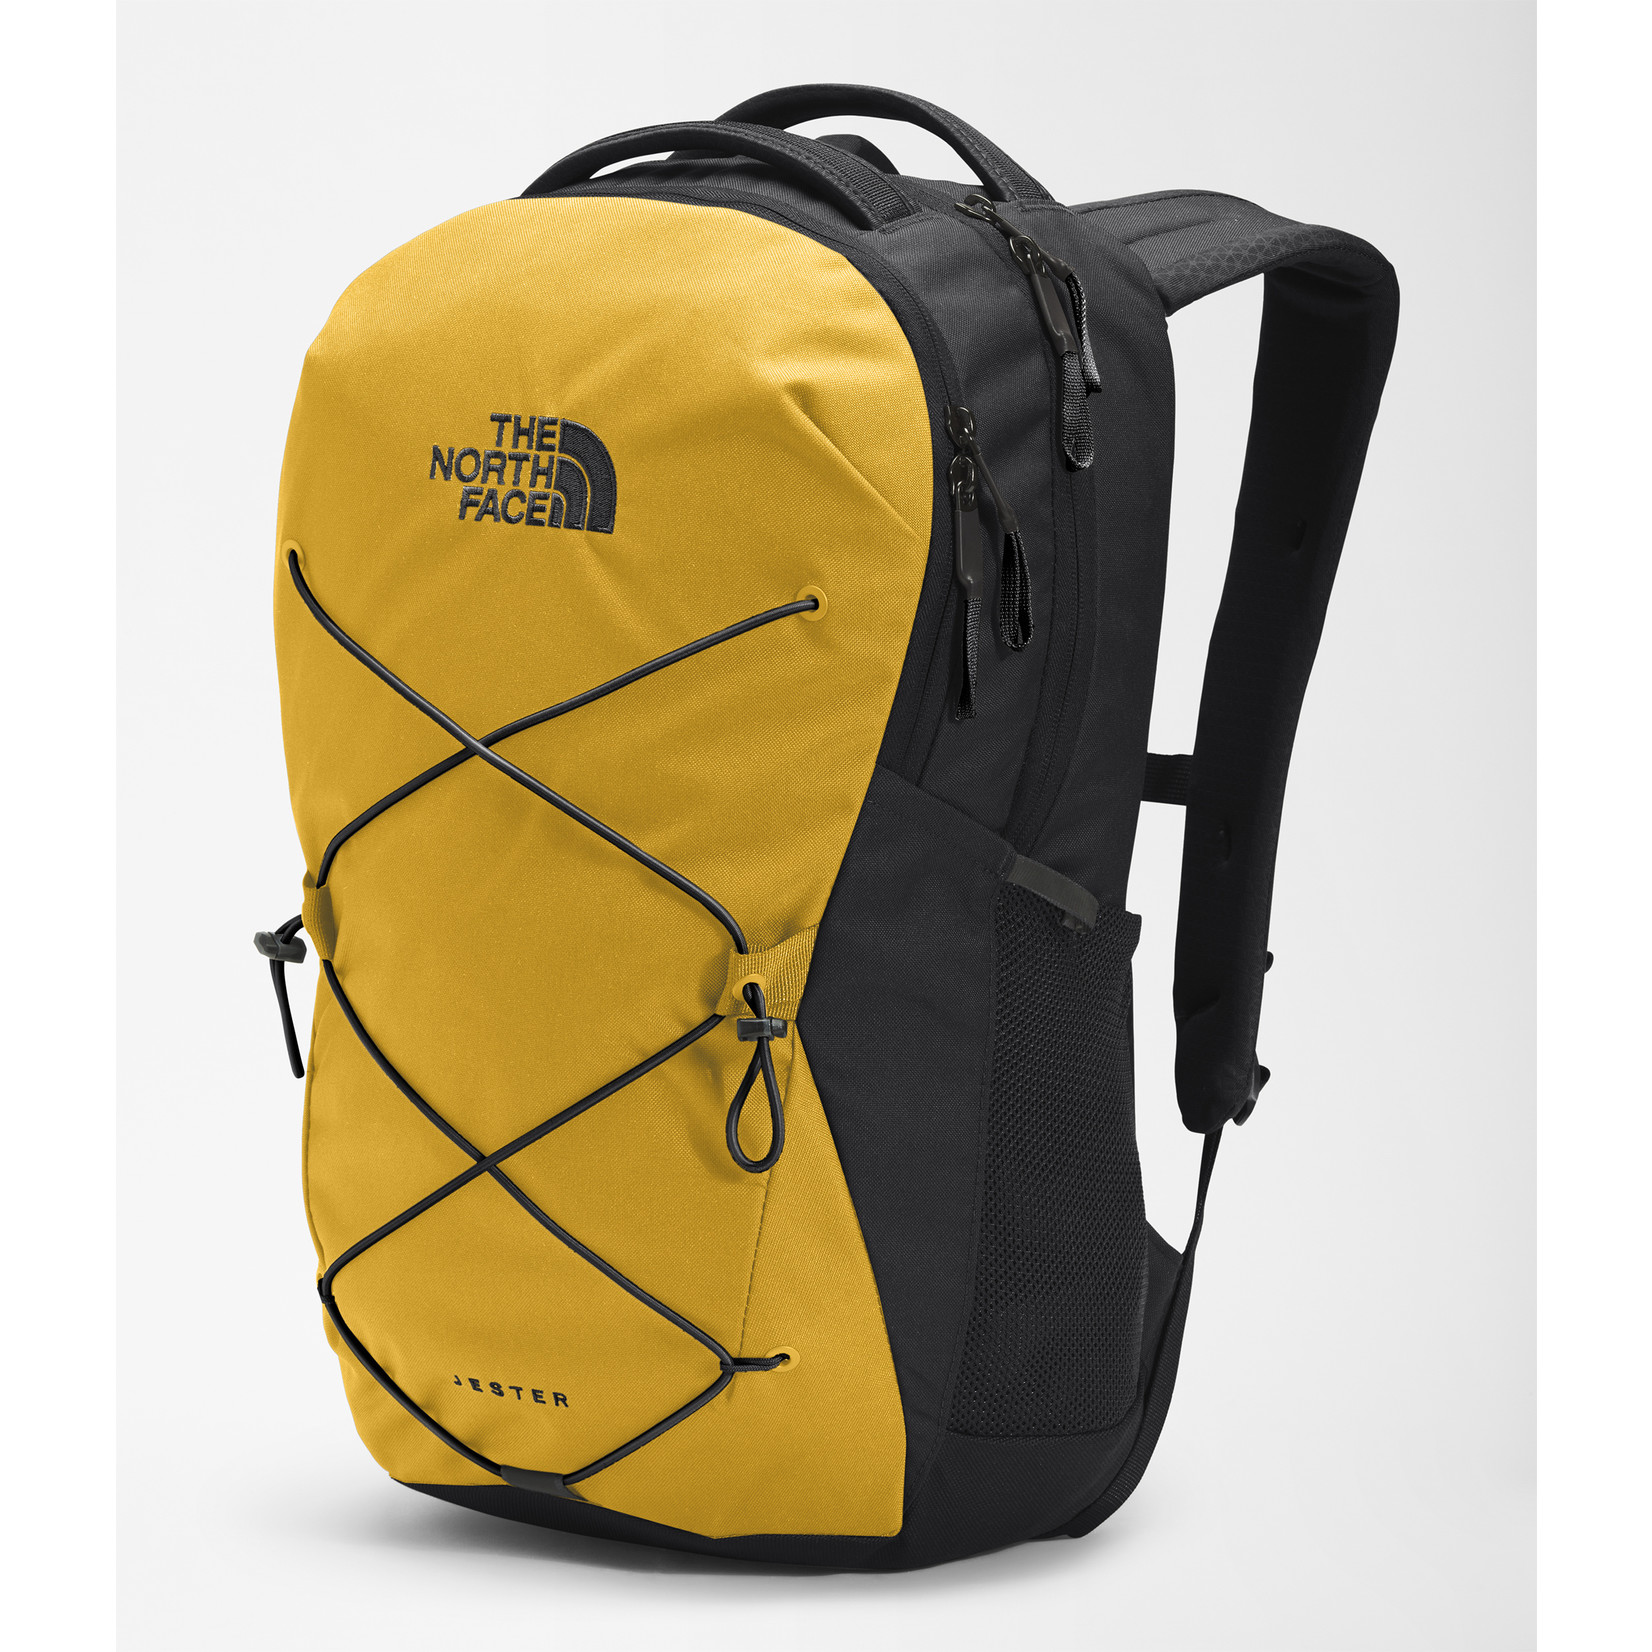 The North Face The North Face Jester Backpack